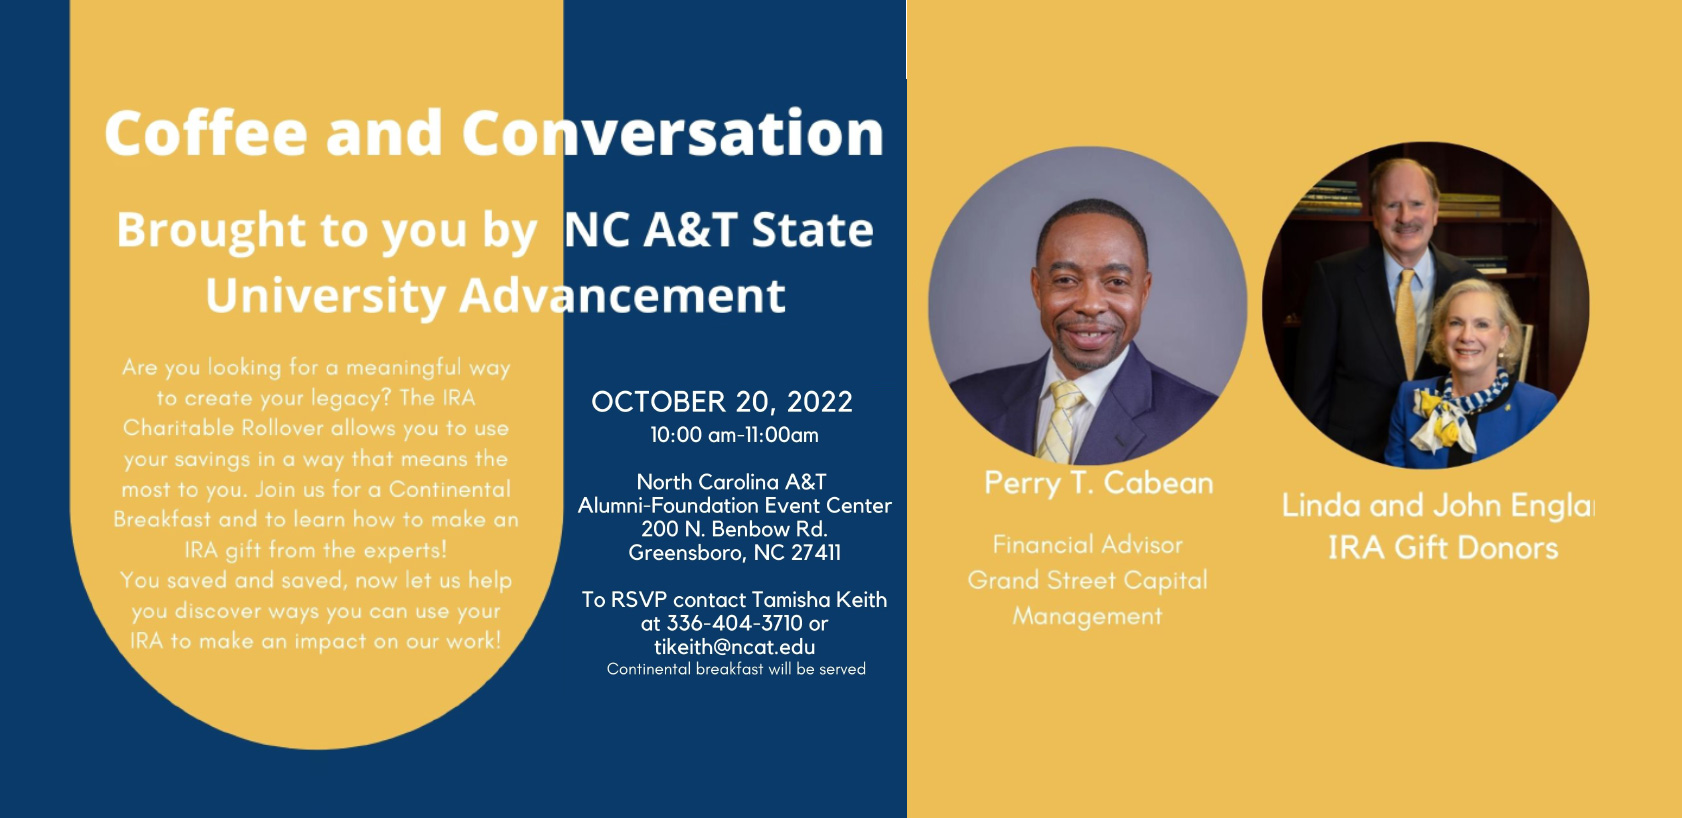 Coffee and Conversation conference flyer